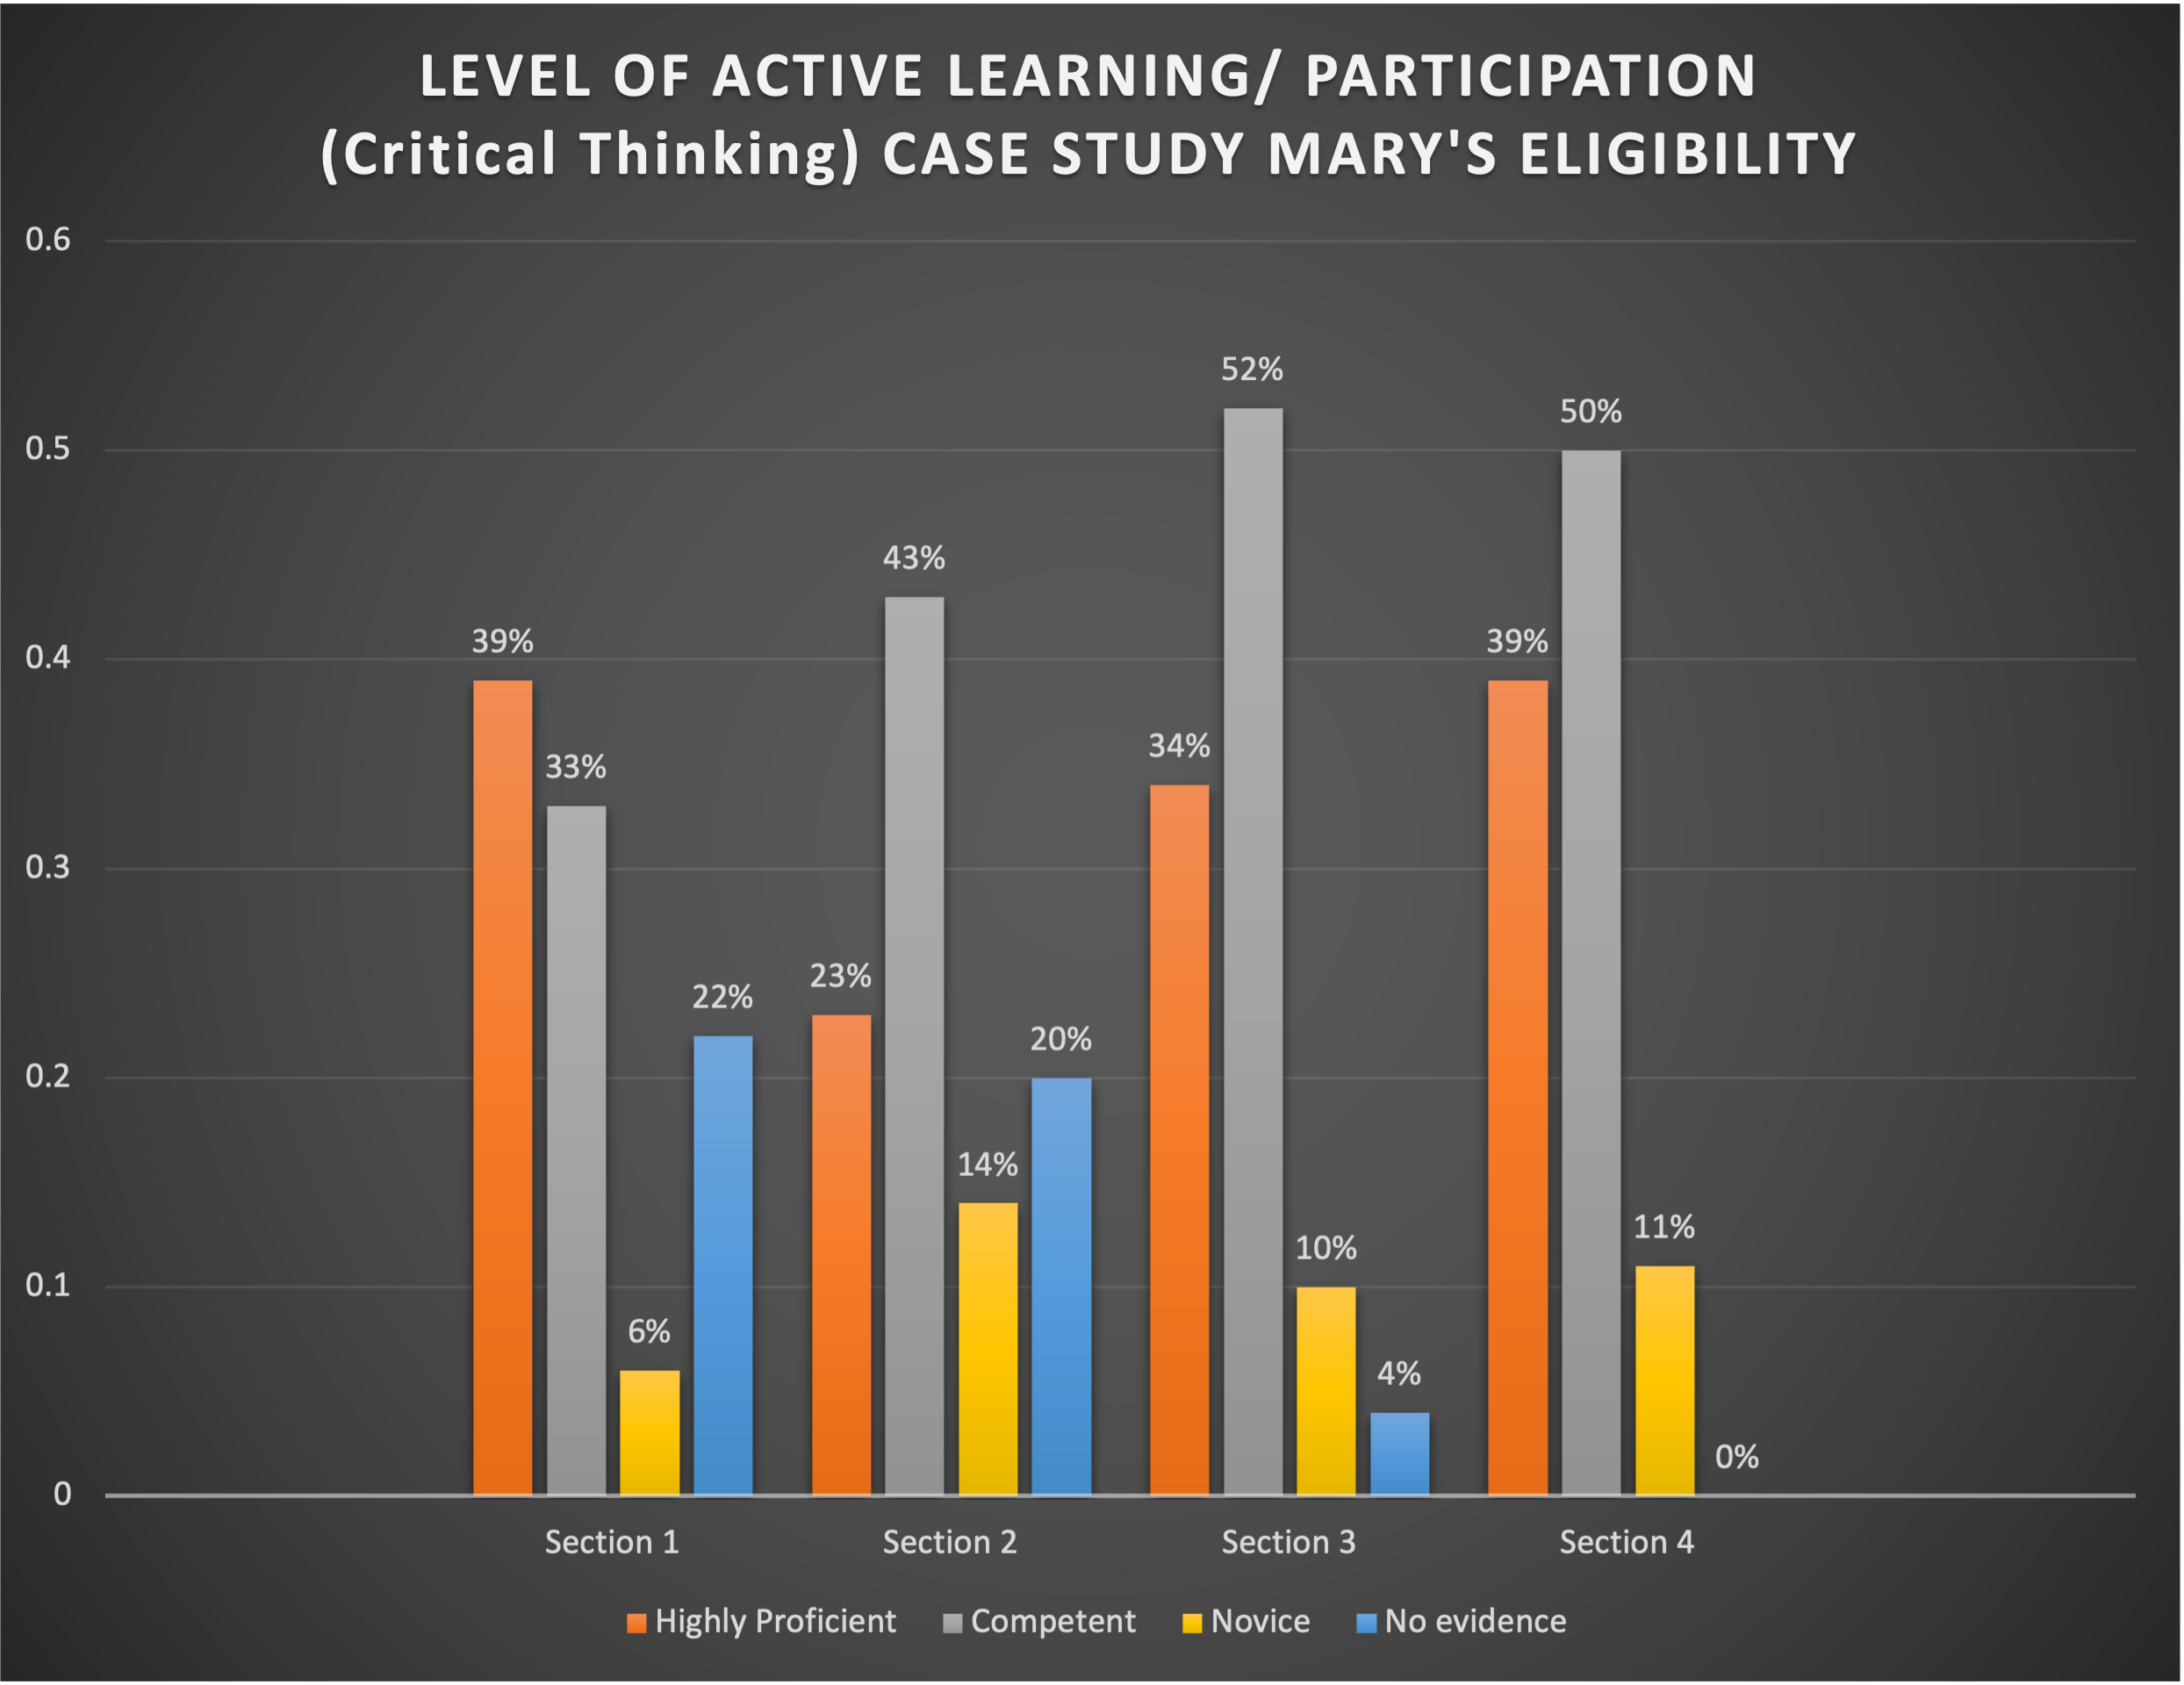 Photo of graph - Level of Active Learning and Participation